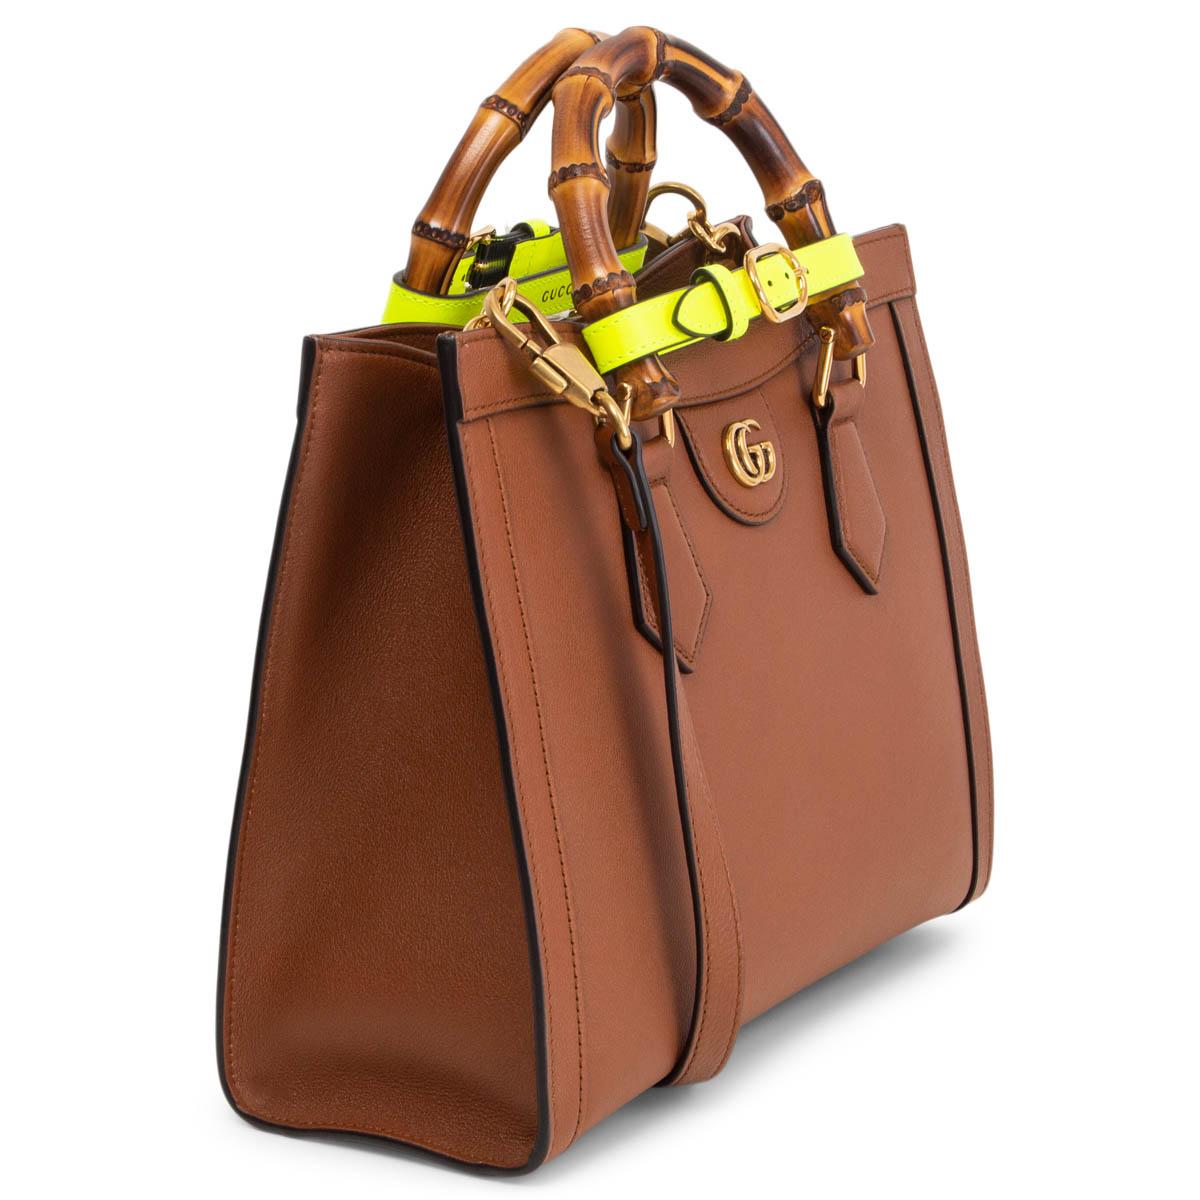 100% authentic Gucci Diana Small Tote Bag in brown calfskin, combining recognizable elements of the House, the small tote bag is defined by its bamboo handles and gold-tone Double G hardware. The bag is further accentuated by two yellow neon straps,